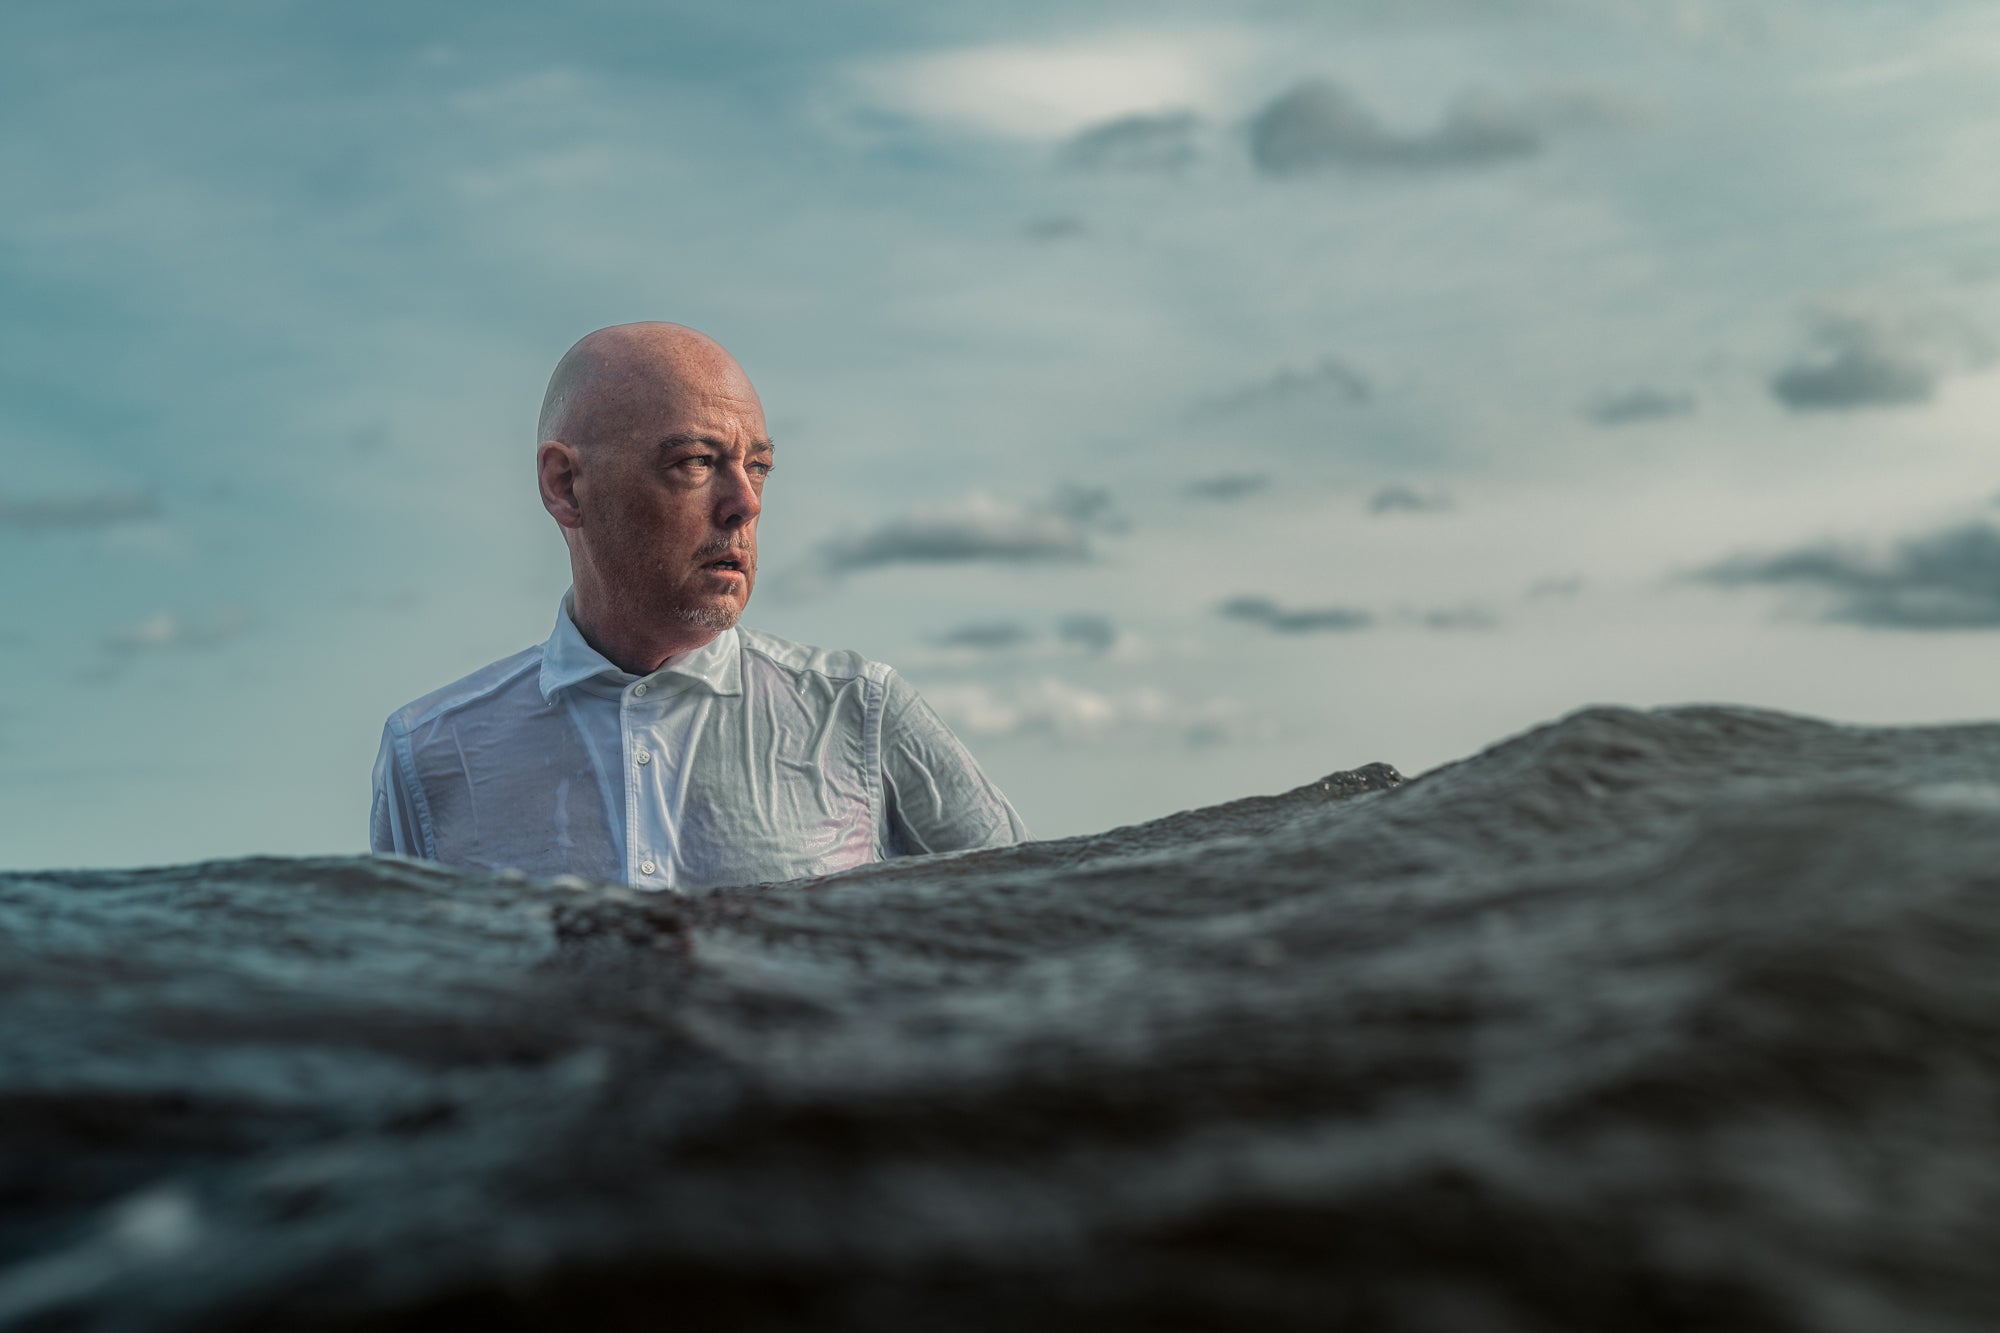 Novelist John Boyne for Irish Independent Review Magazine on the publication of his novella Water.